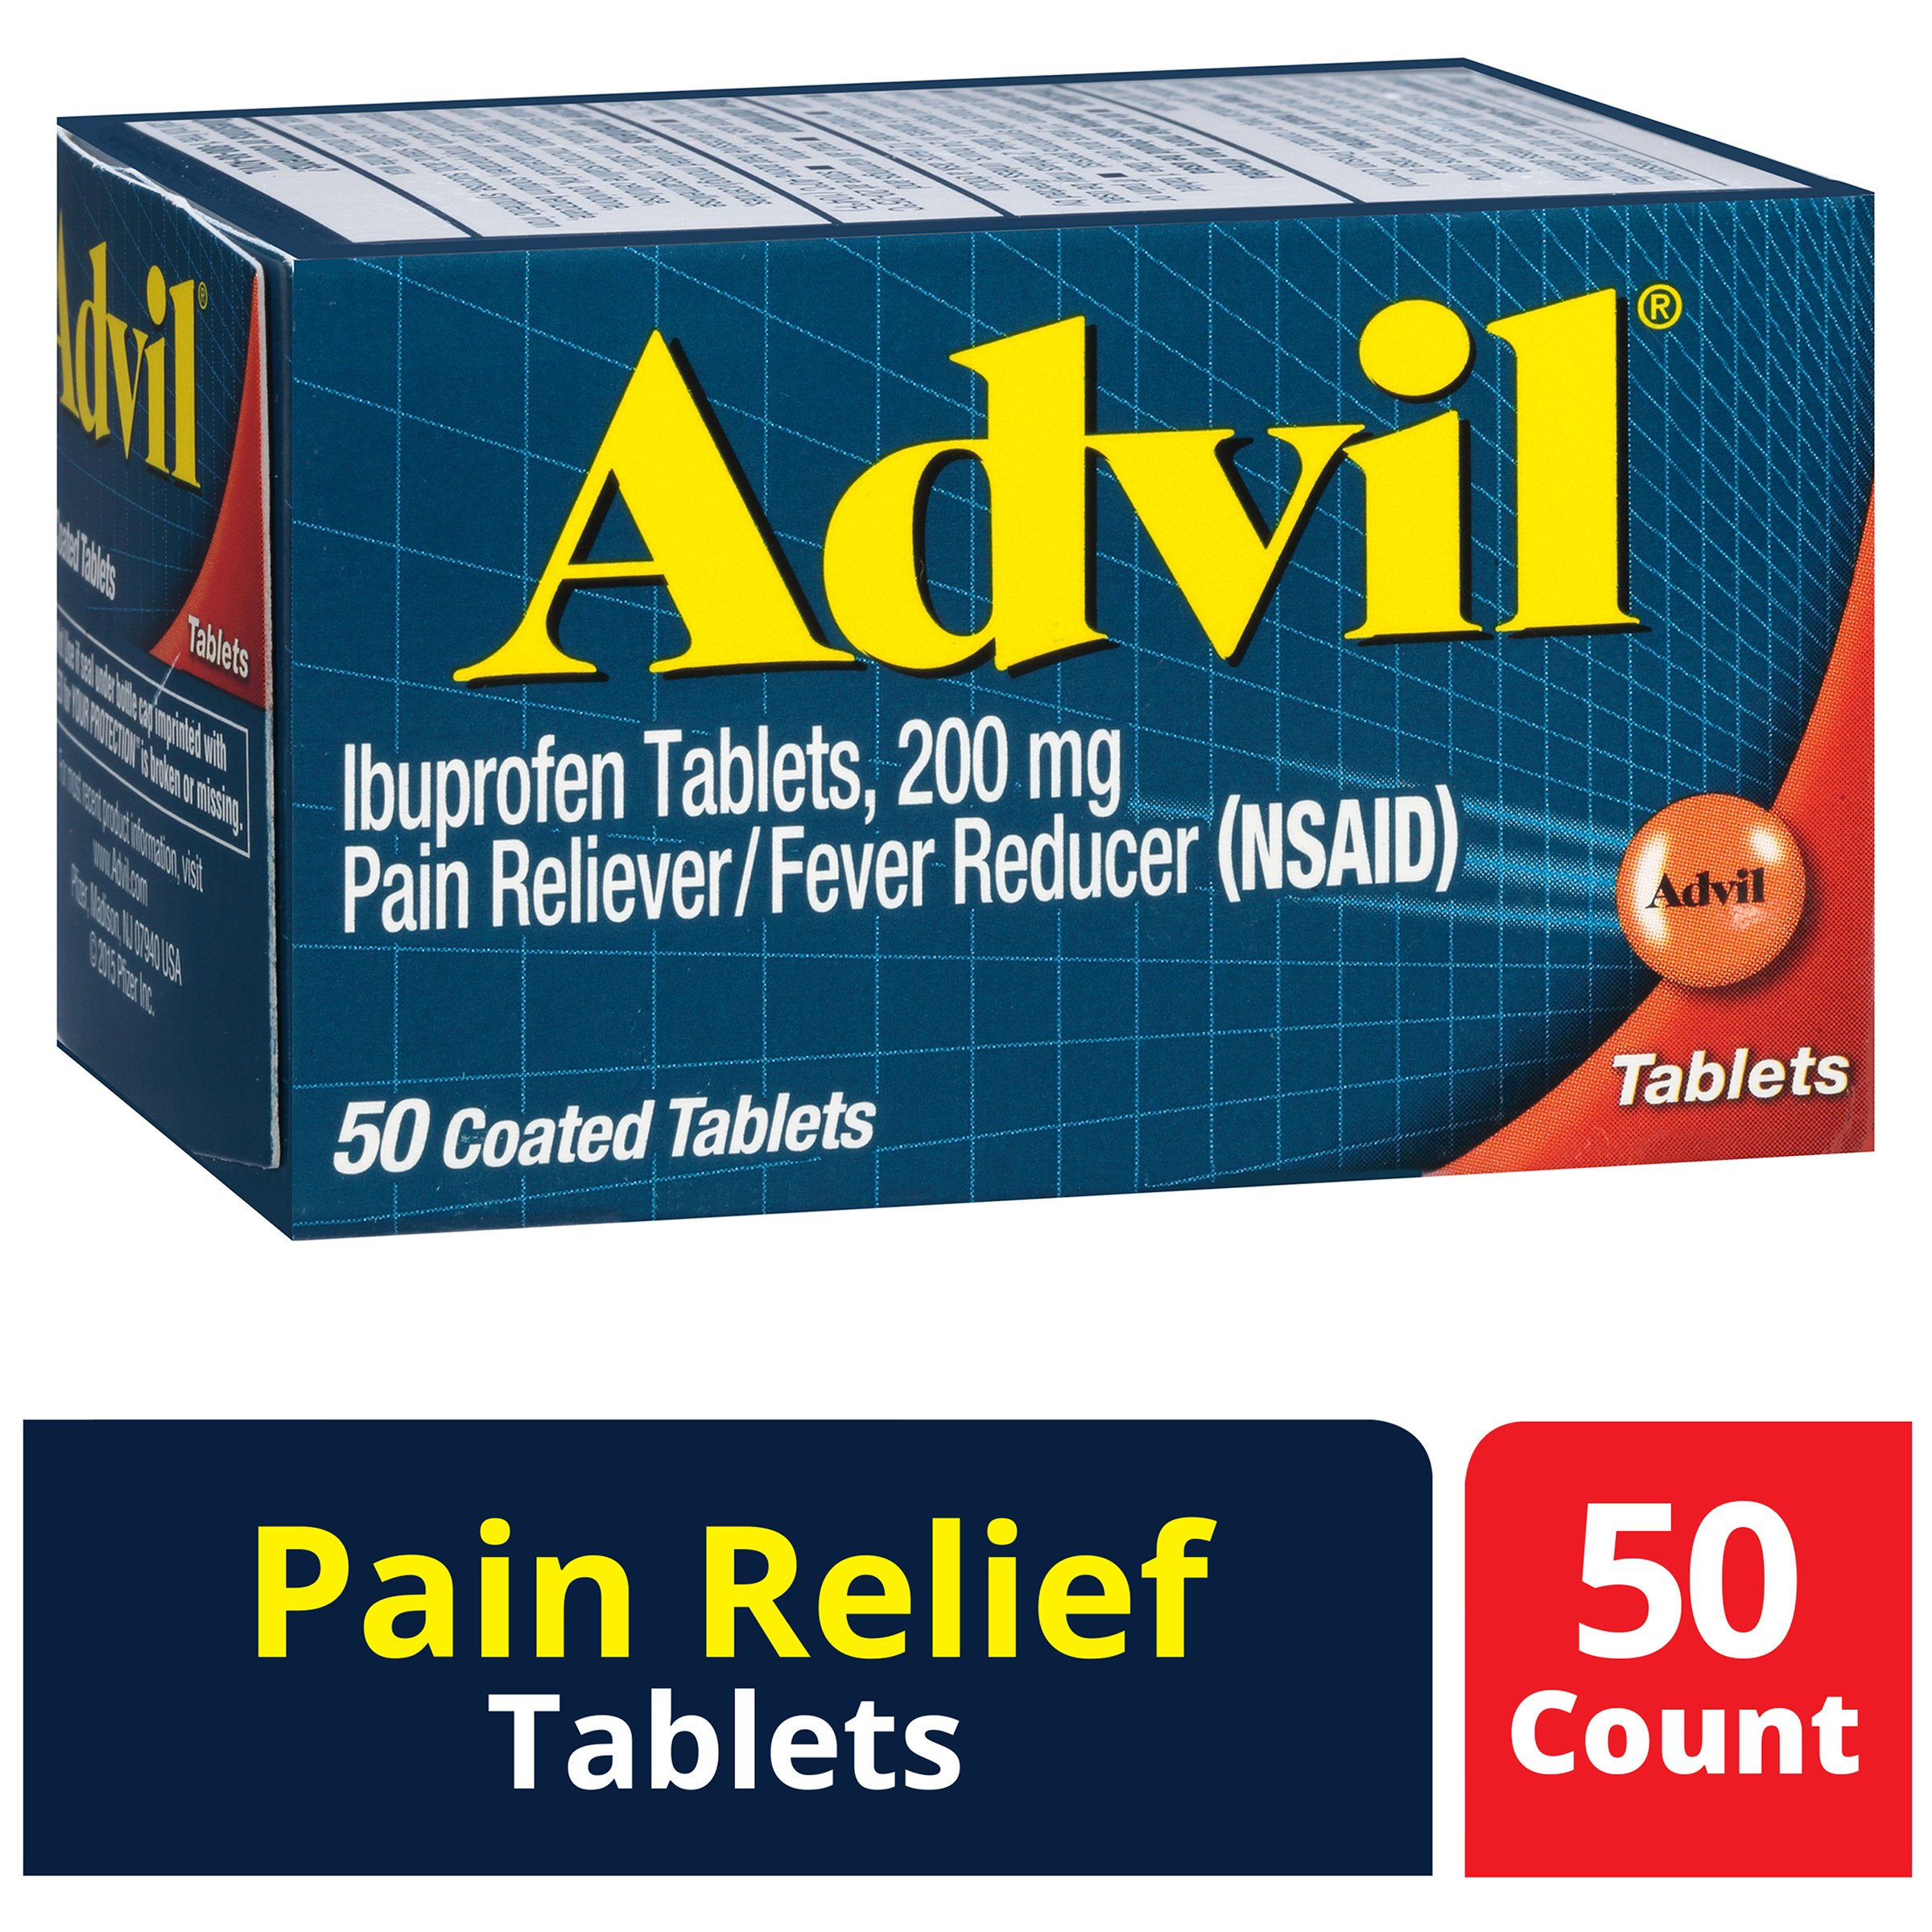 Advil (50 Count) Pain Reliever / Fever Reducer Coated Tablet, 200mg ...